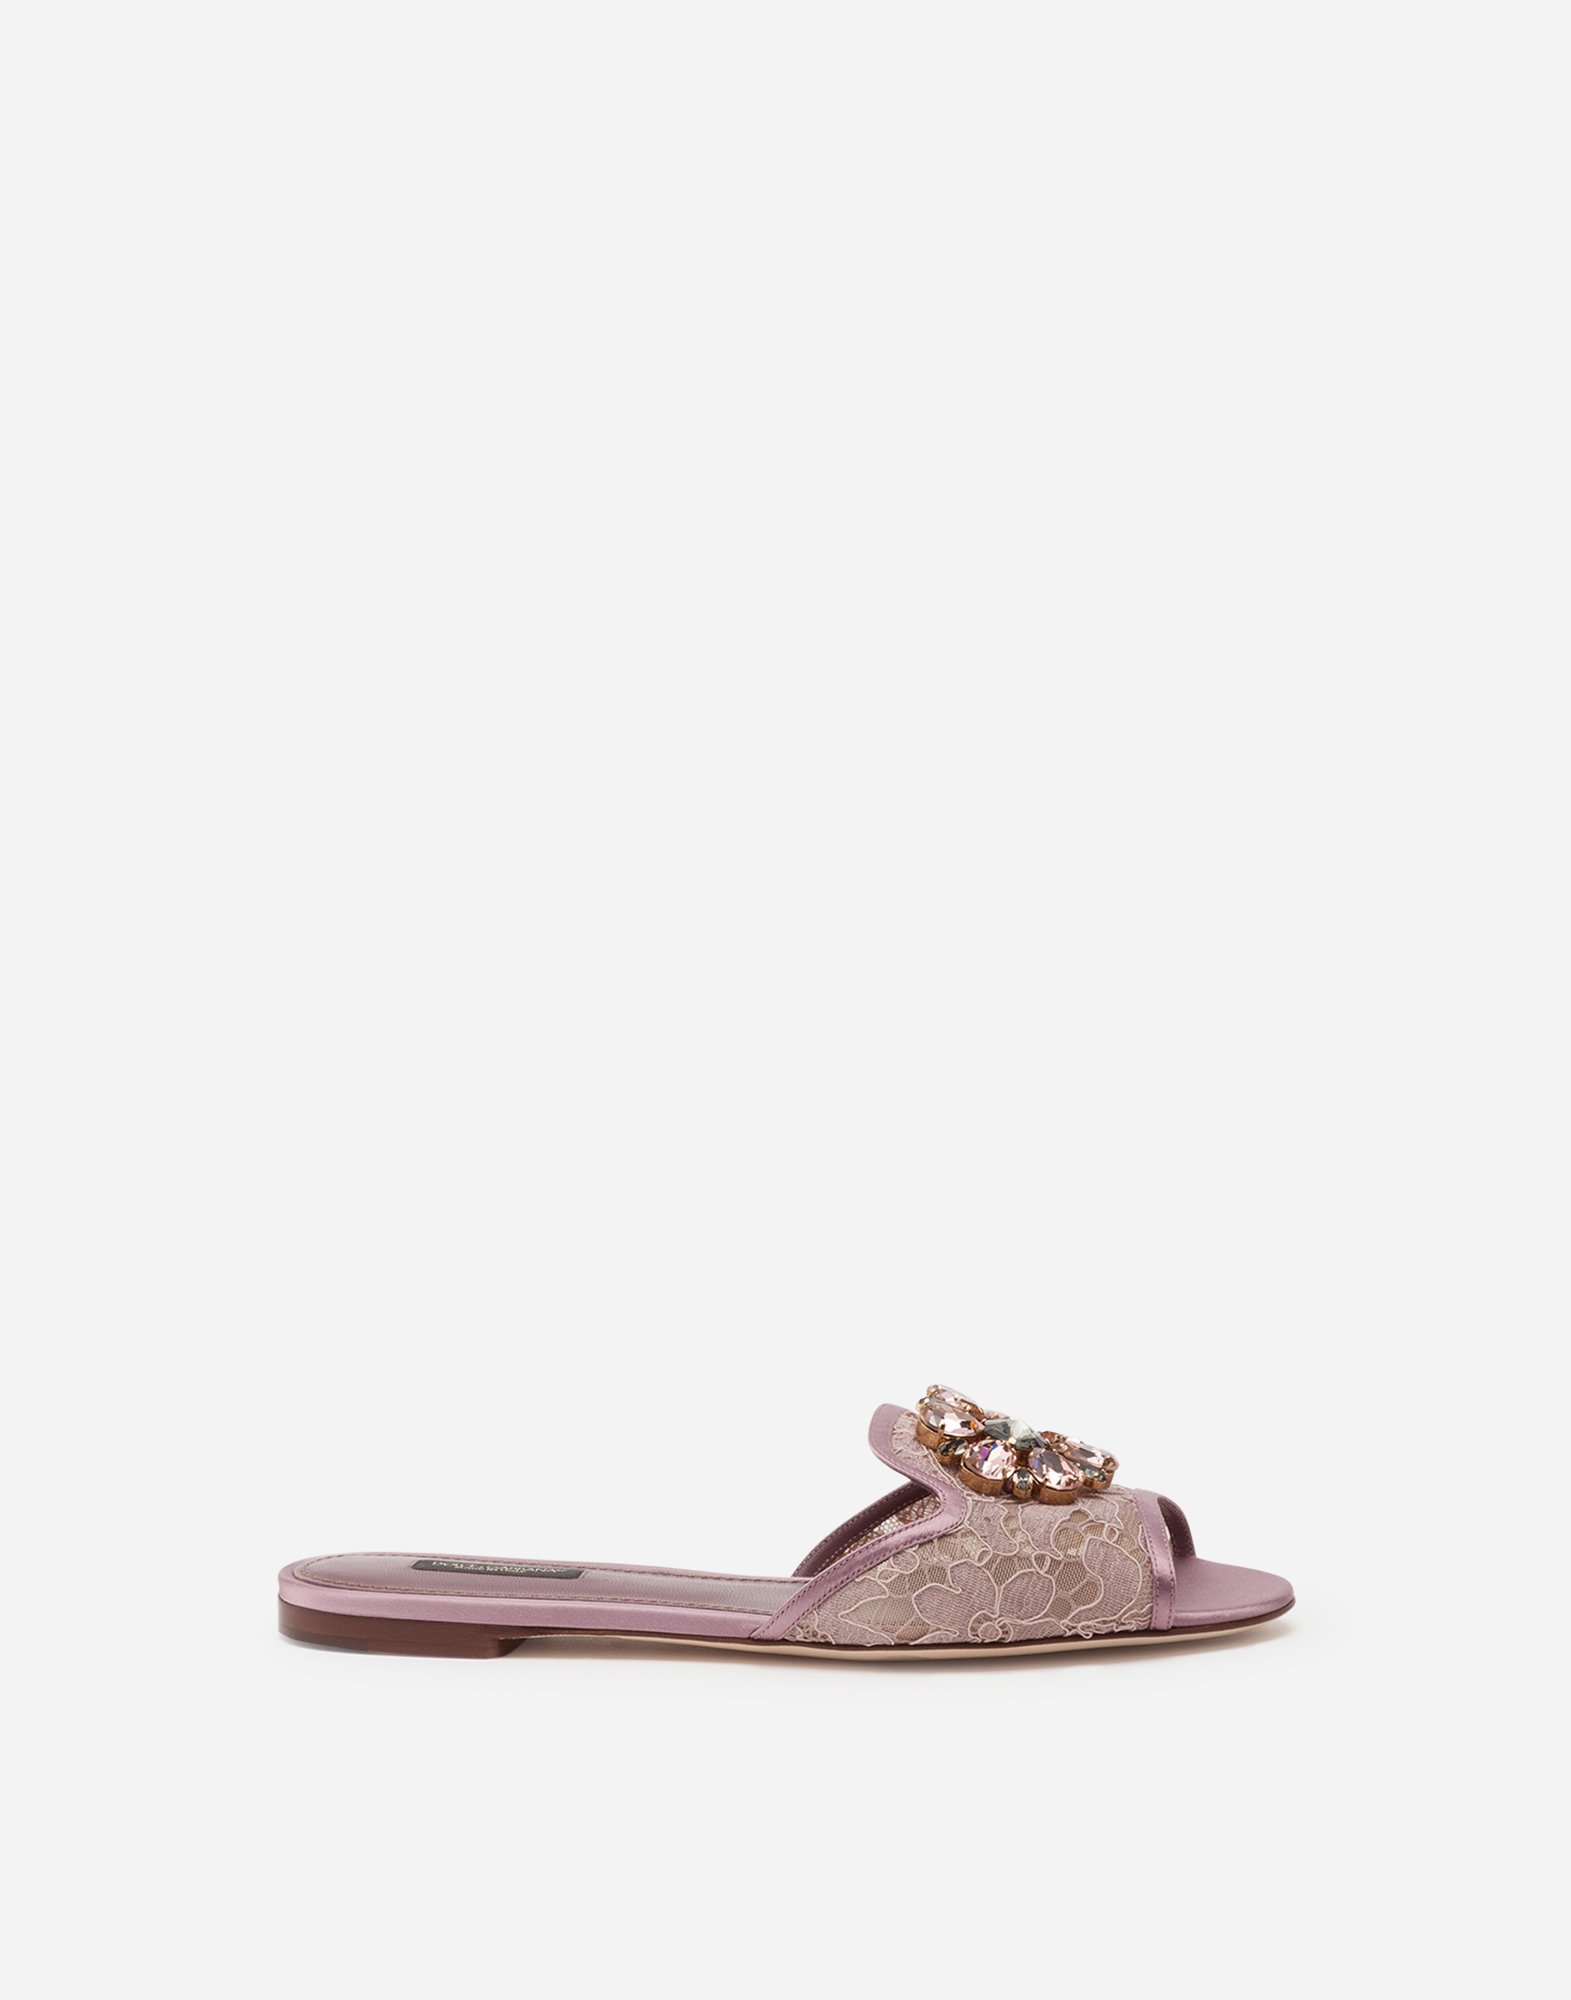 Lace rainbow slides with brooch detailing in Blush